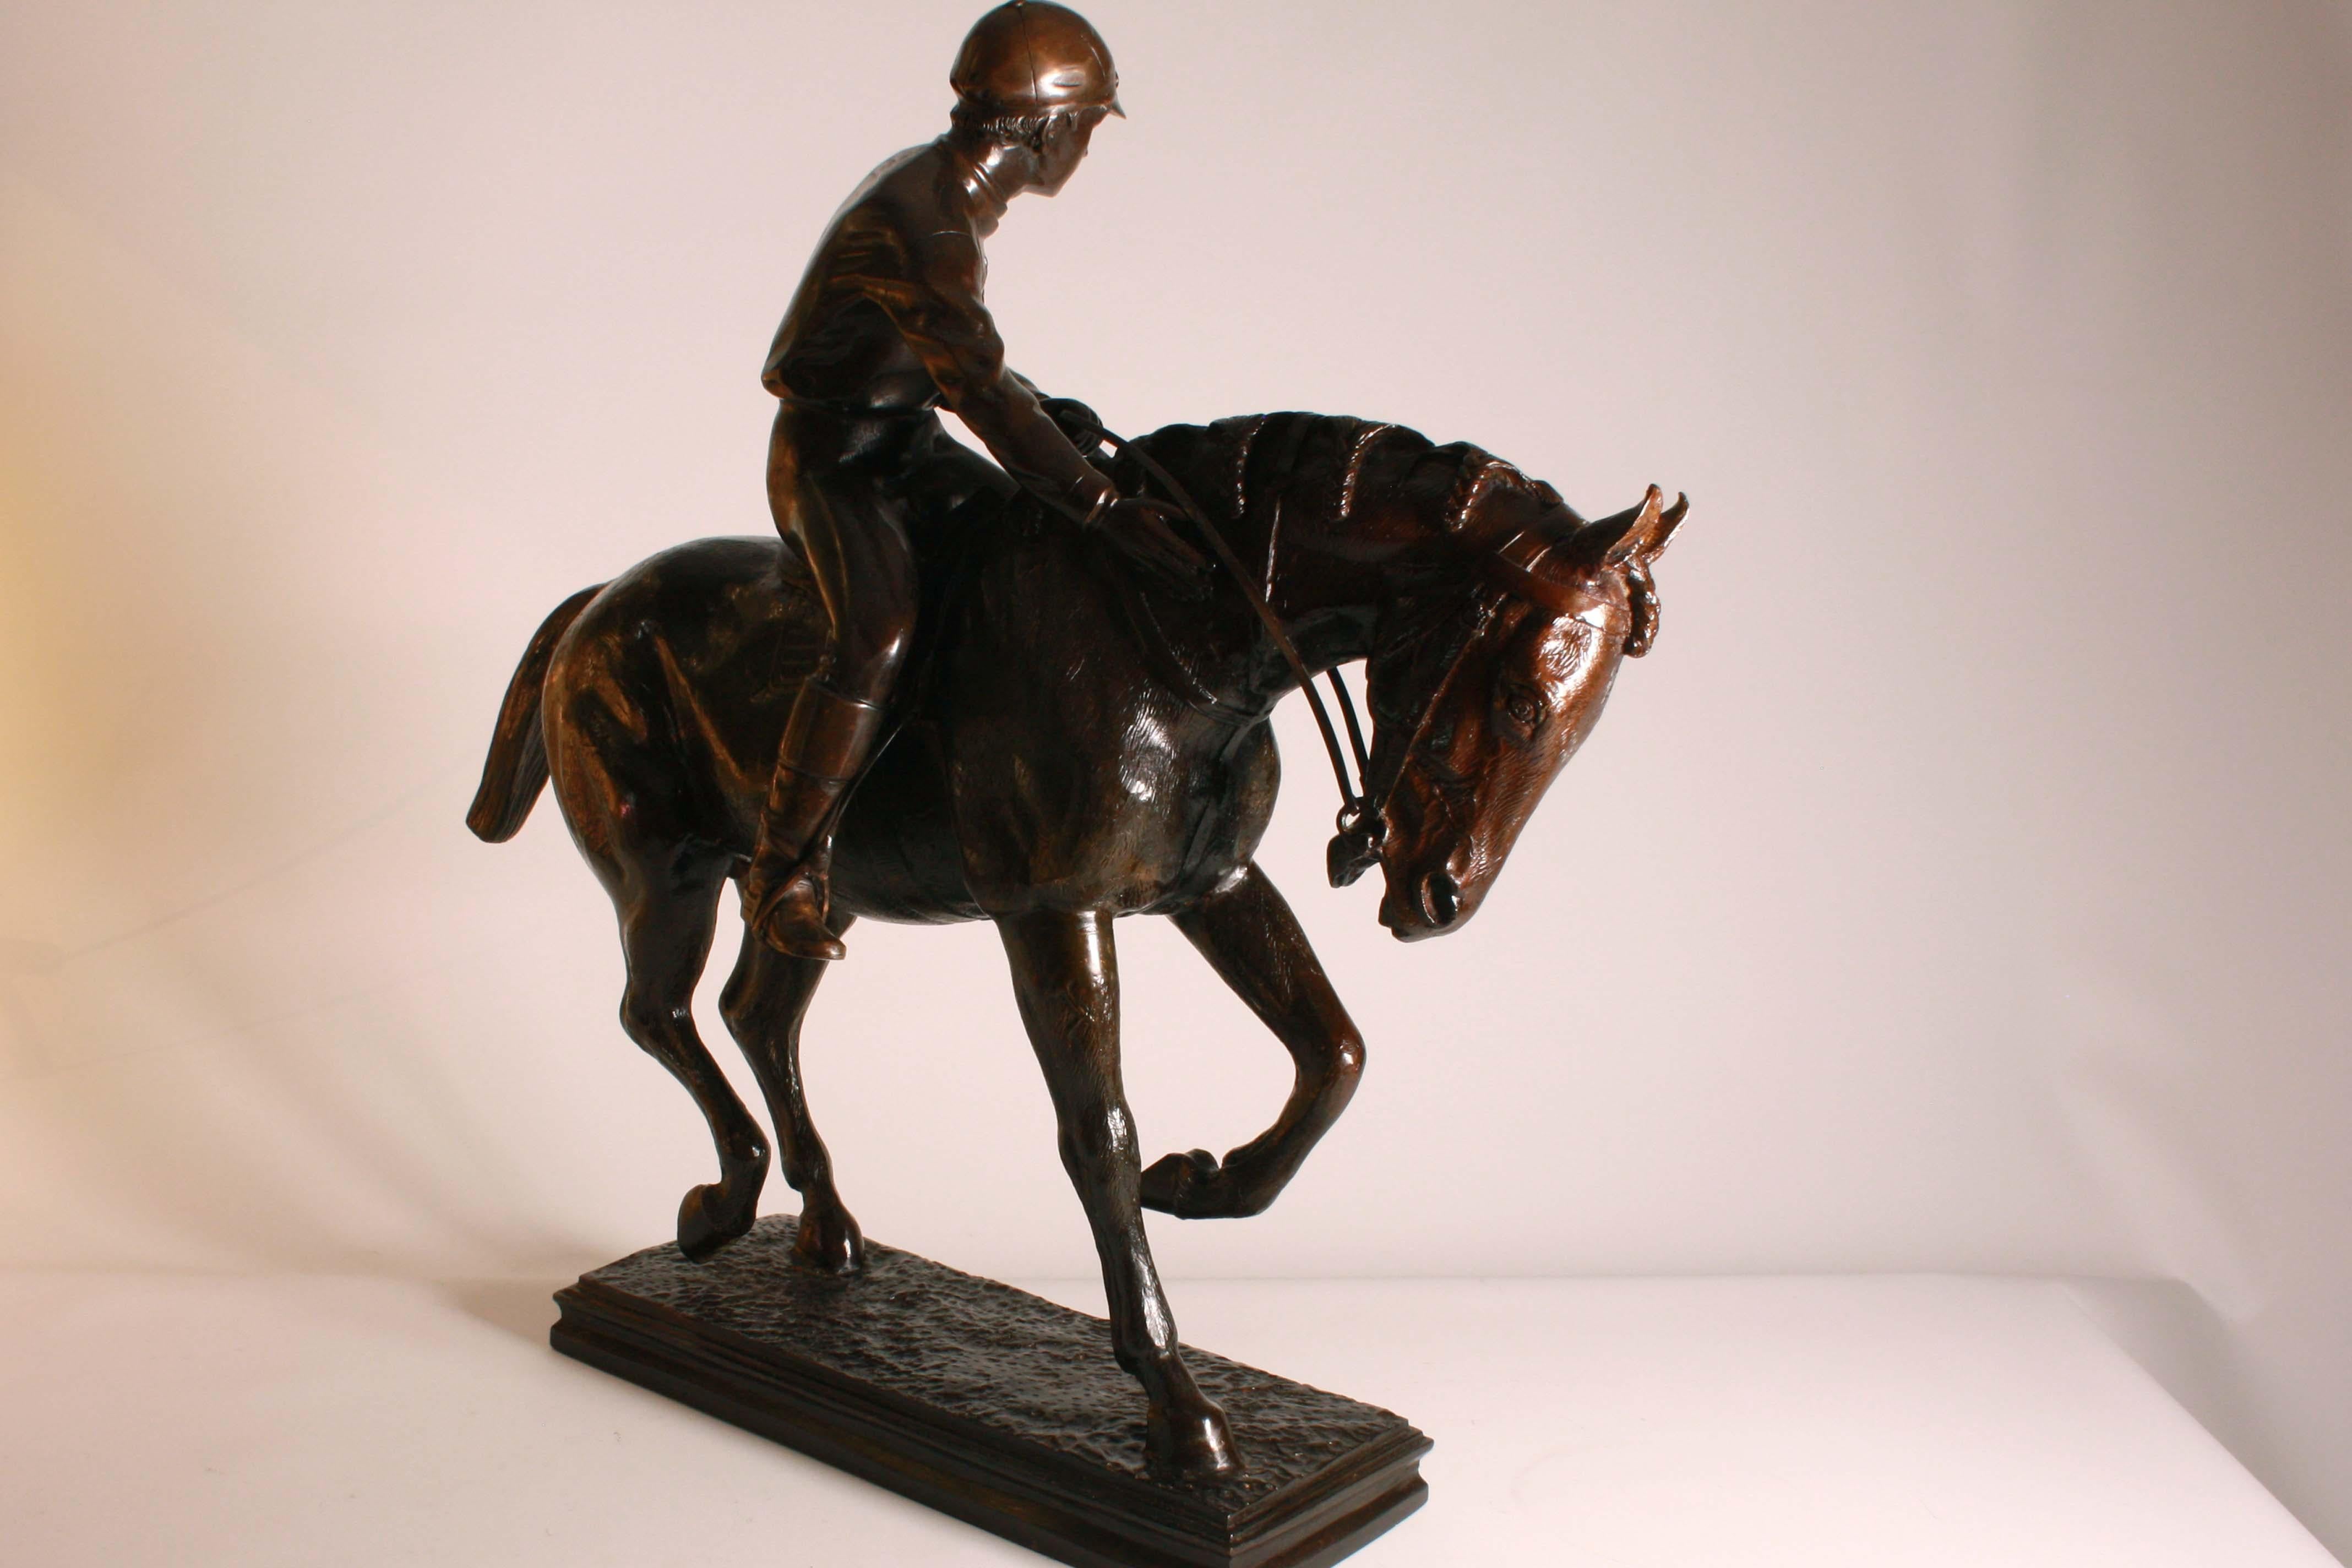 French Victorian (19th century) large bronze figure of a jockey astride a galloping racehorse.

The bronze measures 24